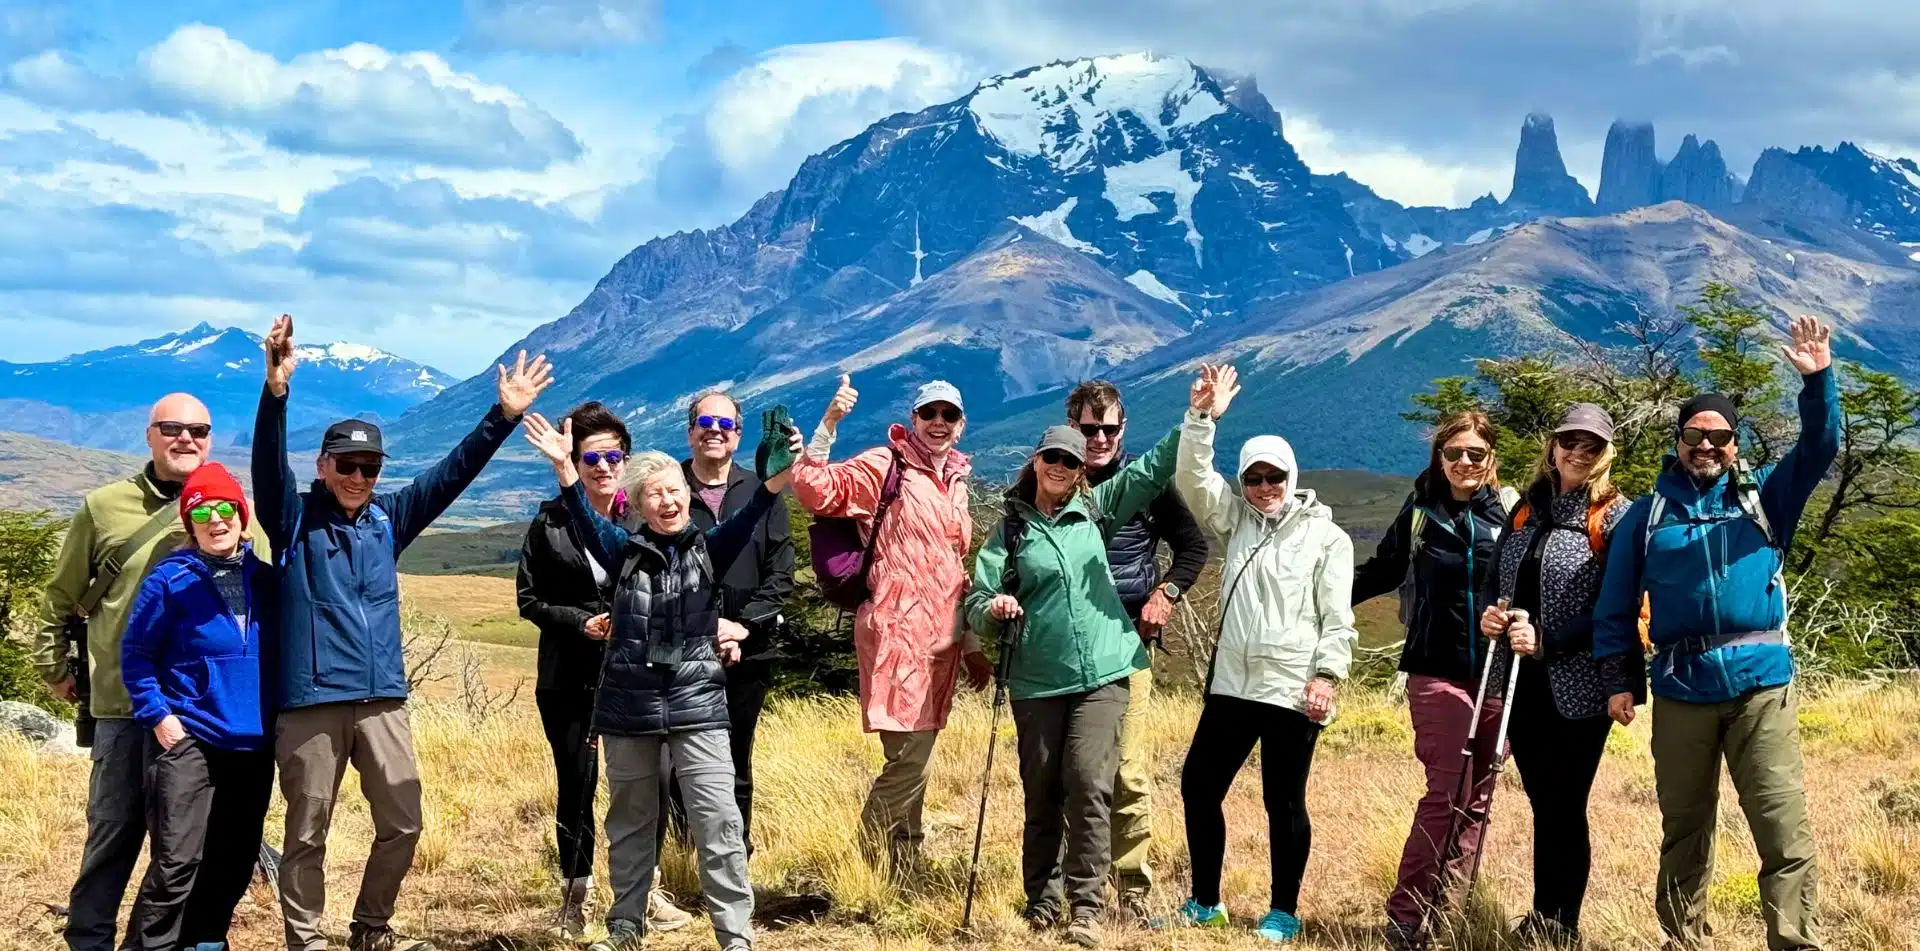 Classic Journeys guests having a great time in Chile